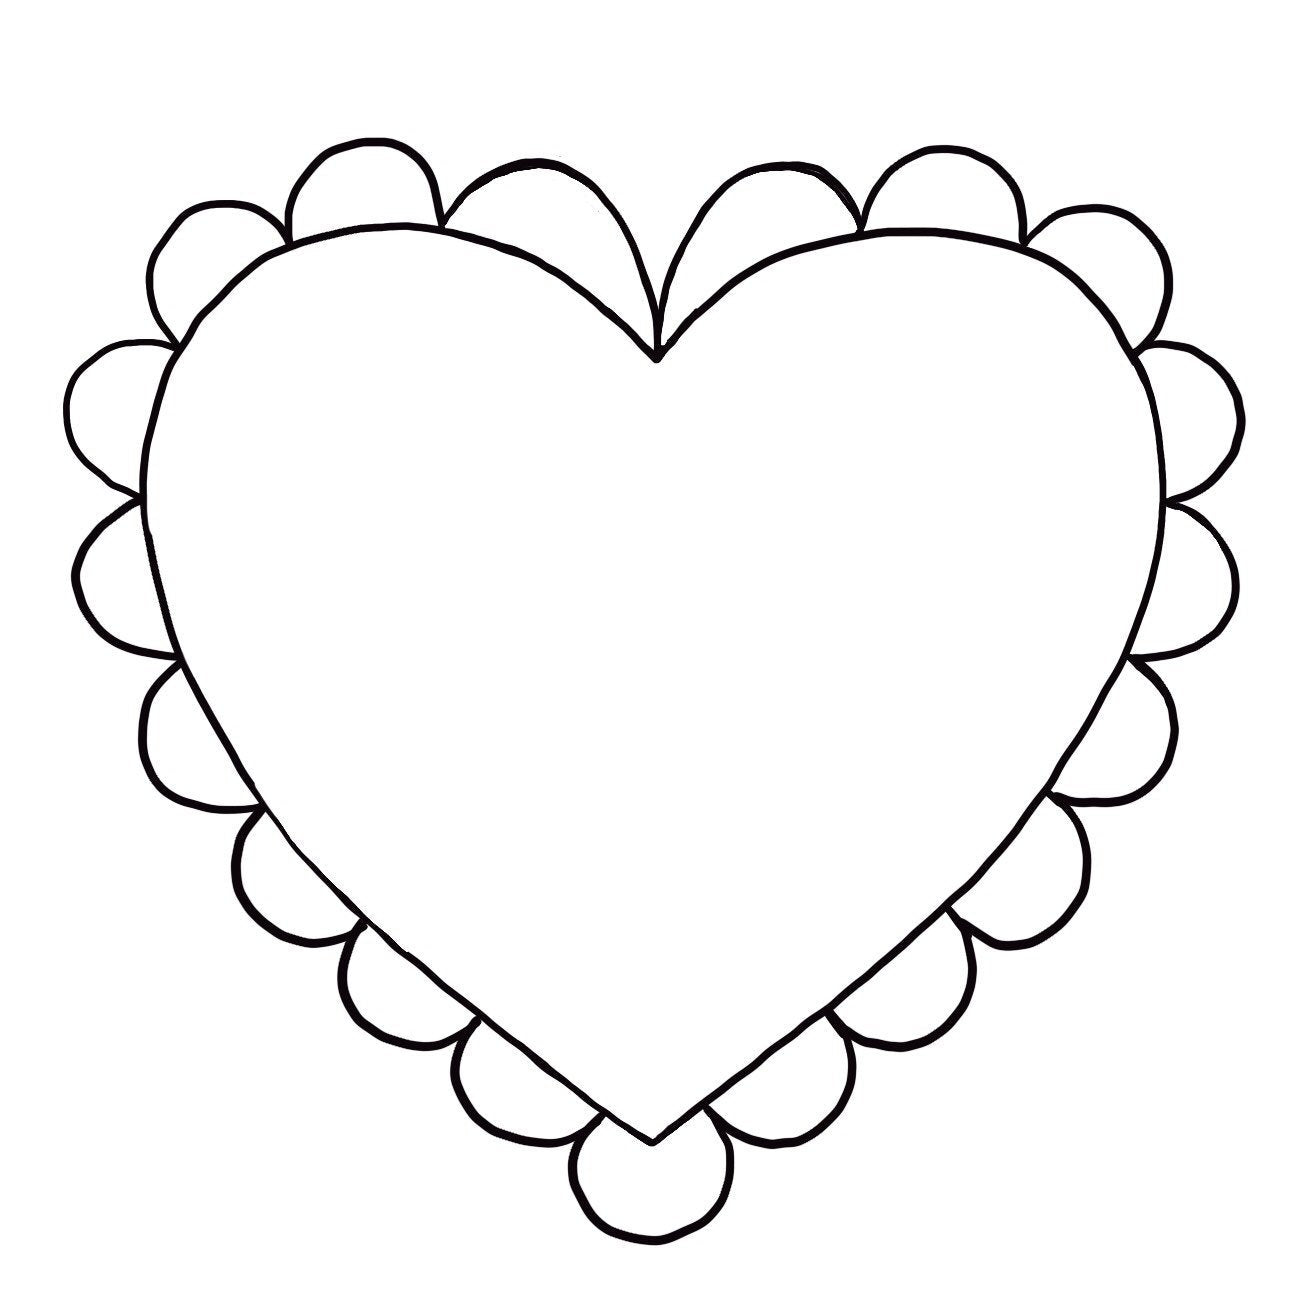 Scalloped Heart Cookie Cutter 4 — The Cookie Countess